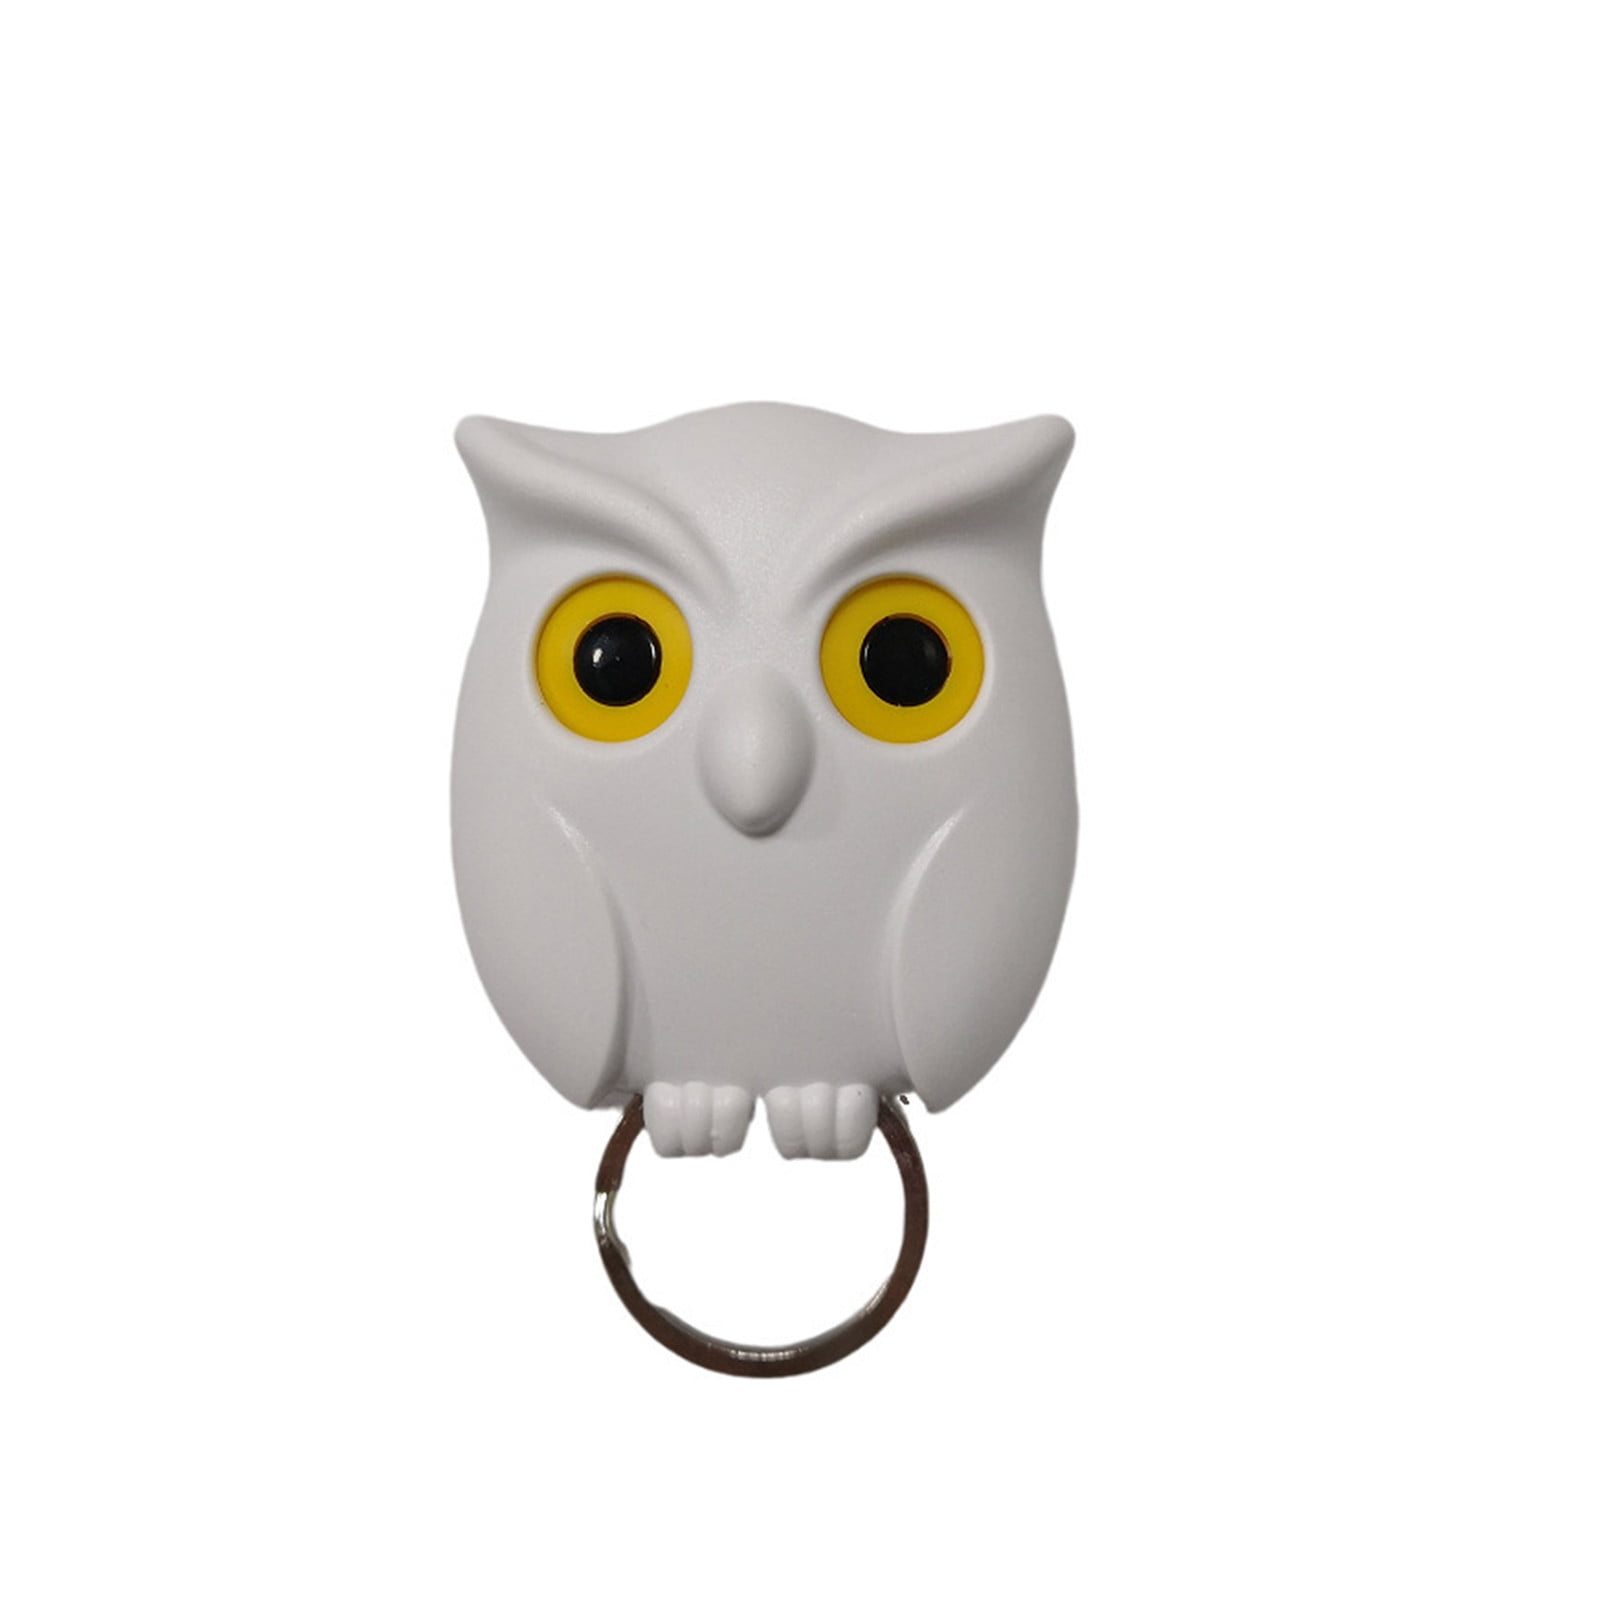 1PCs Night Owl Black White Coffee Magnetic Wall Key Holder Magnets Keychains 